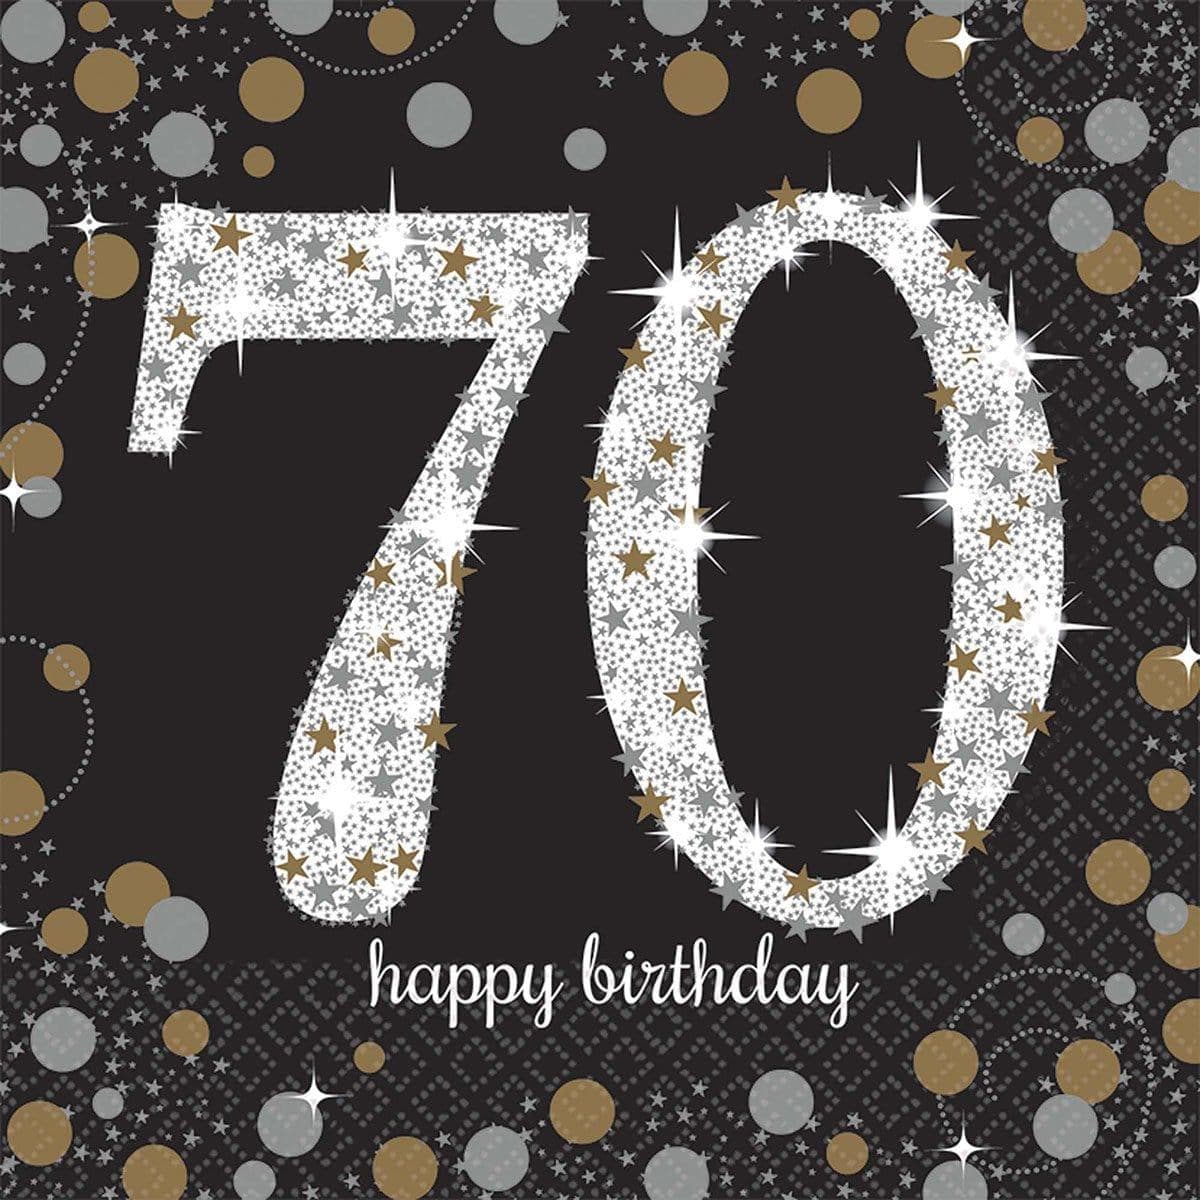 Buy Age Specific Birthday 70th Sparkling Celeb - Lunch Napkins 16/pkg sold at Party Expert